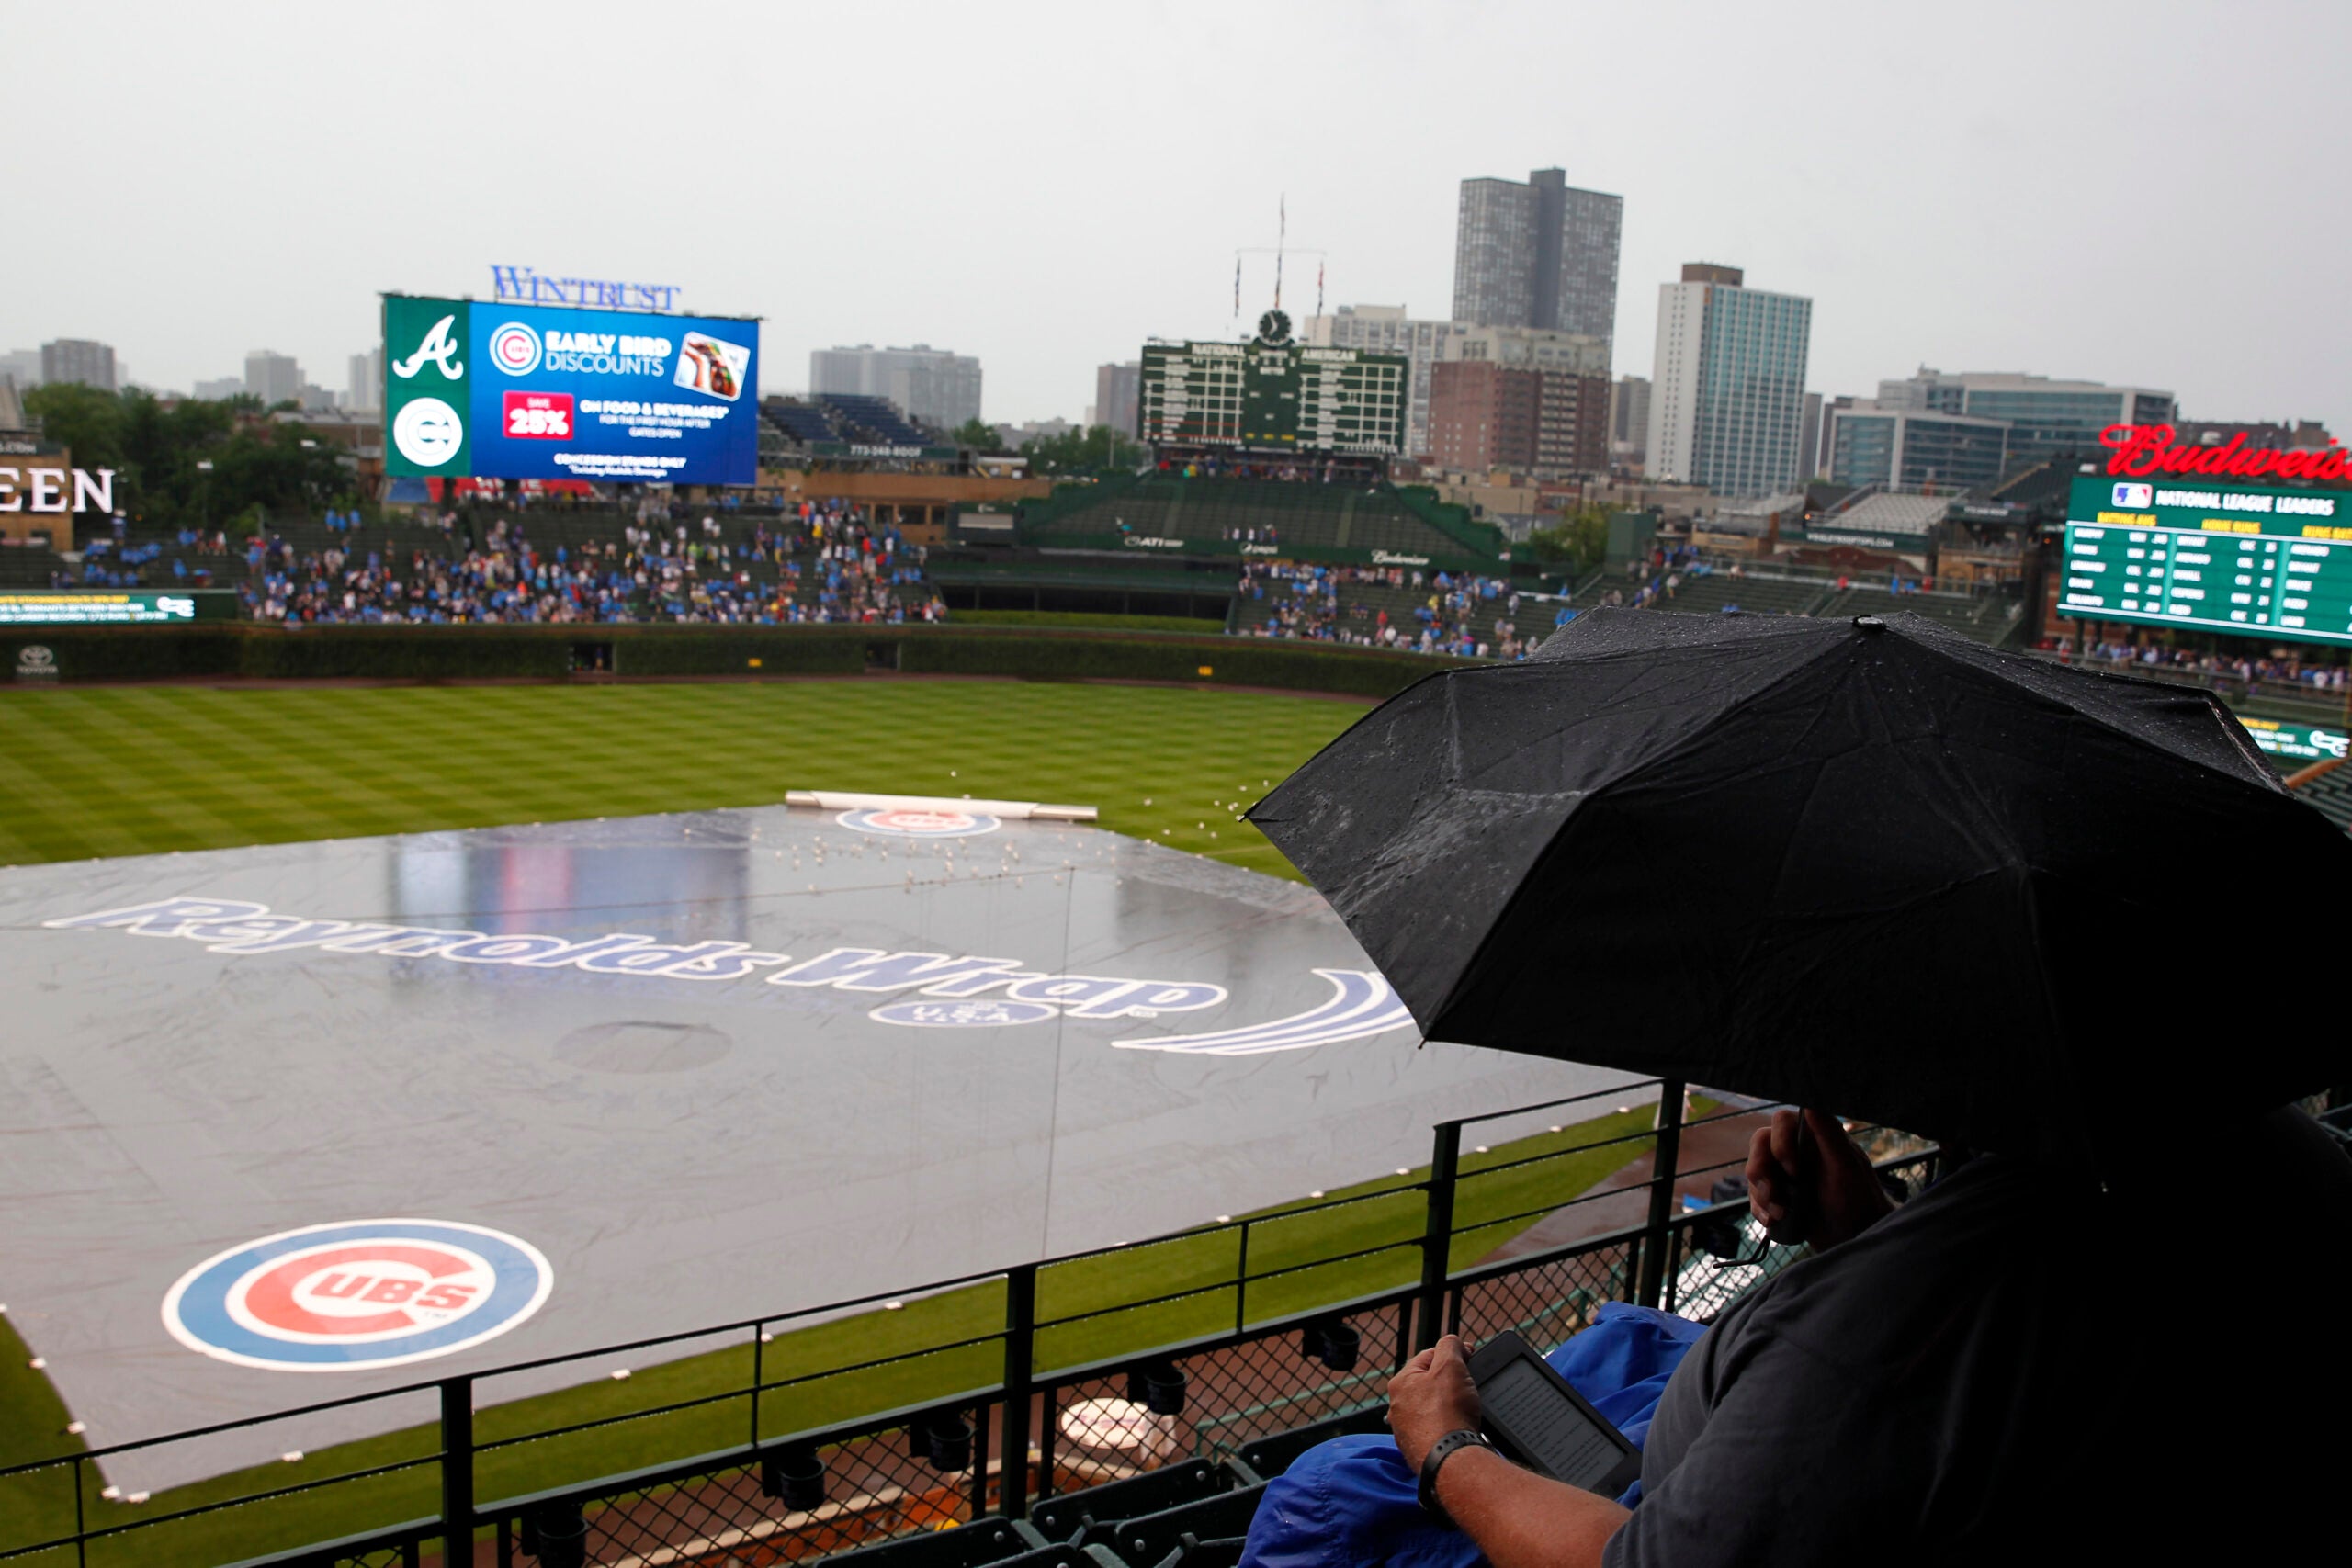 Wrigley Field's bleachers are completely gone